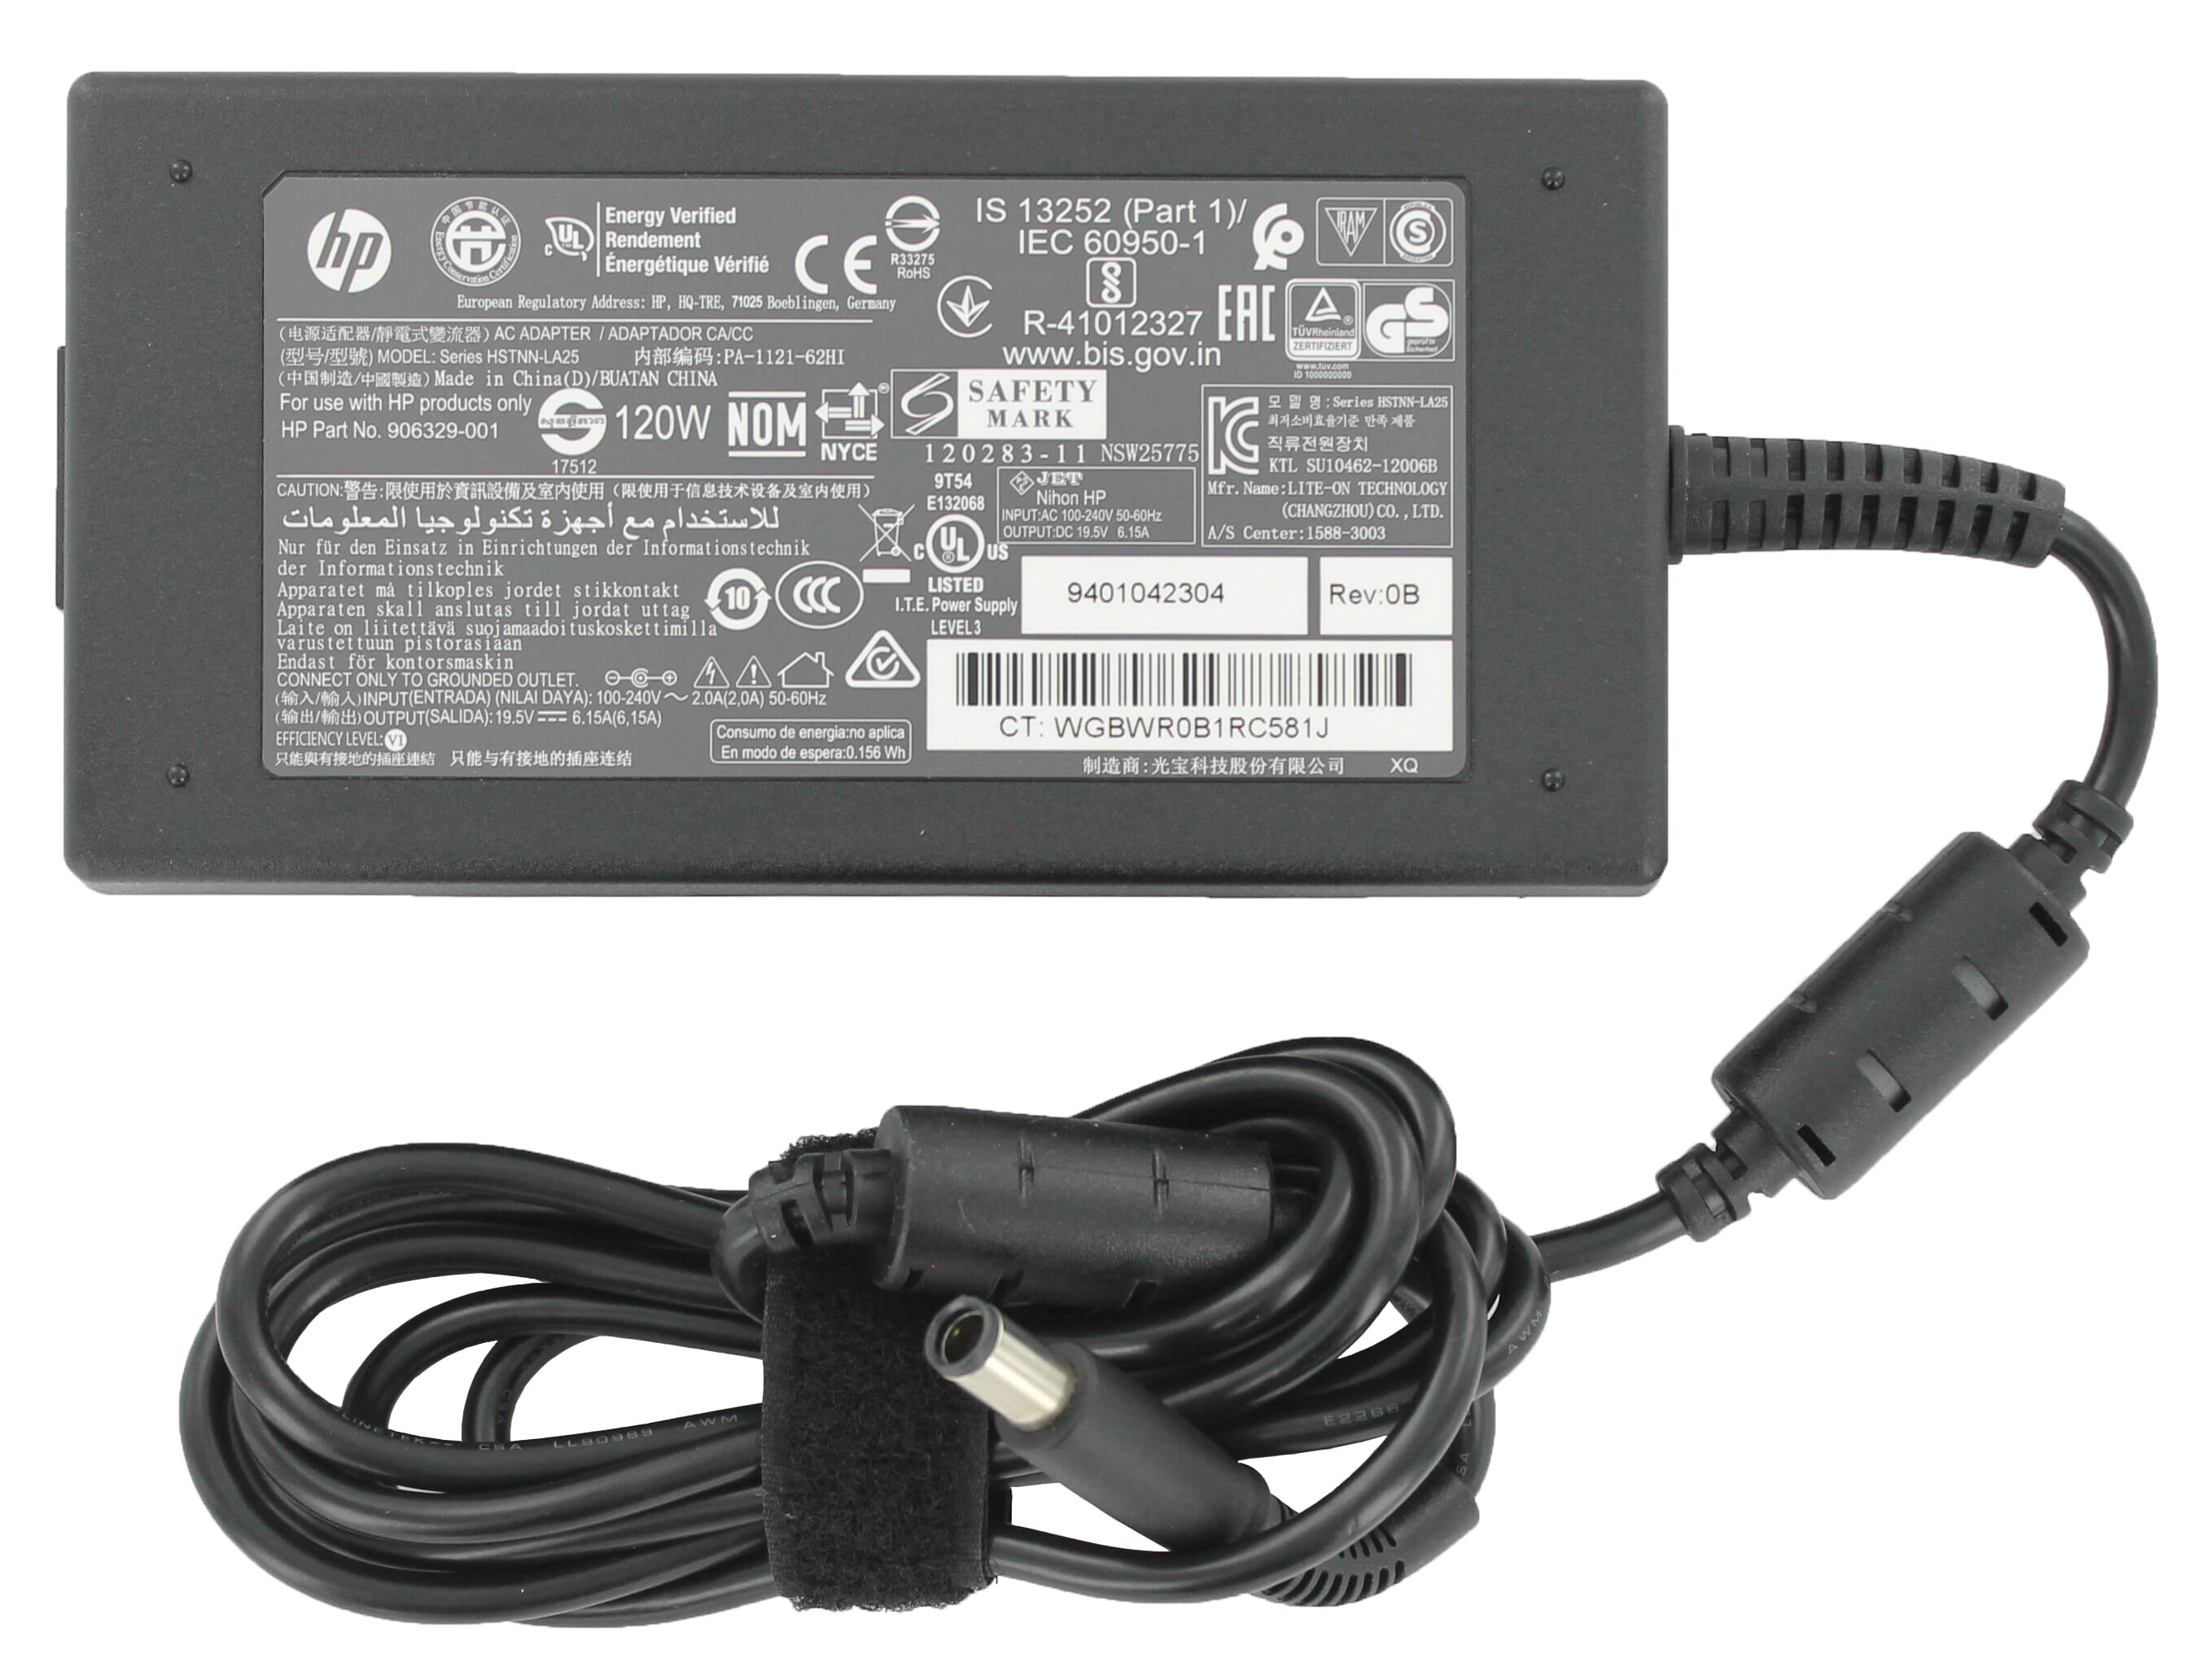 HP Laptop Smart AC Adapter 120W voor HP Pavilion (463953-001) ReplaceDirect.nl